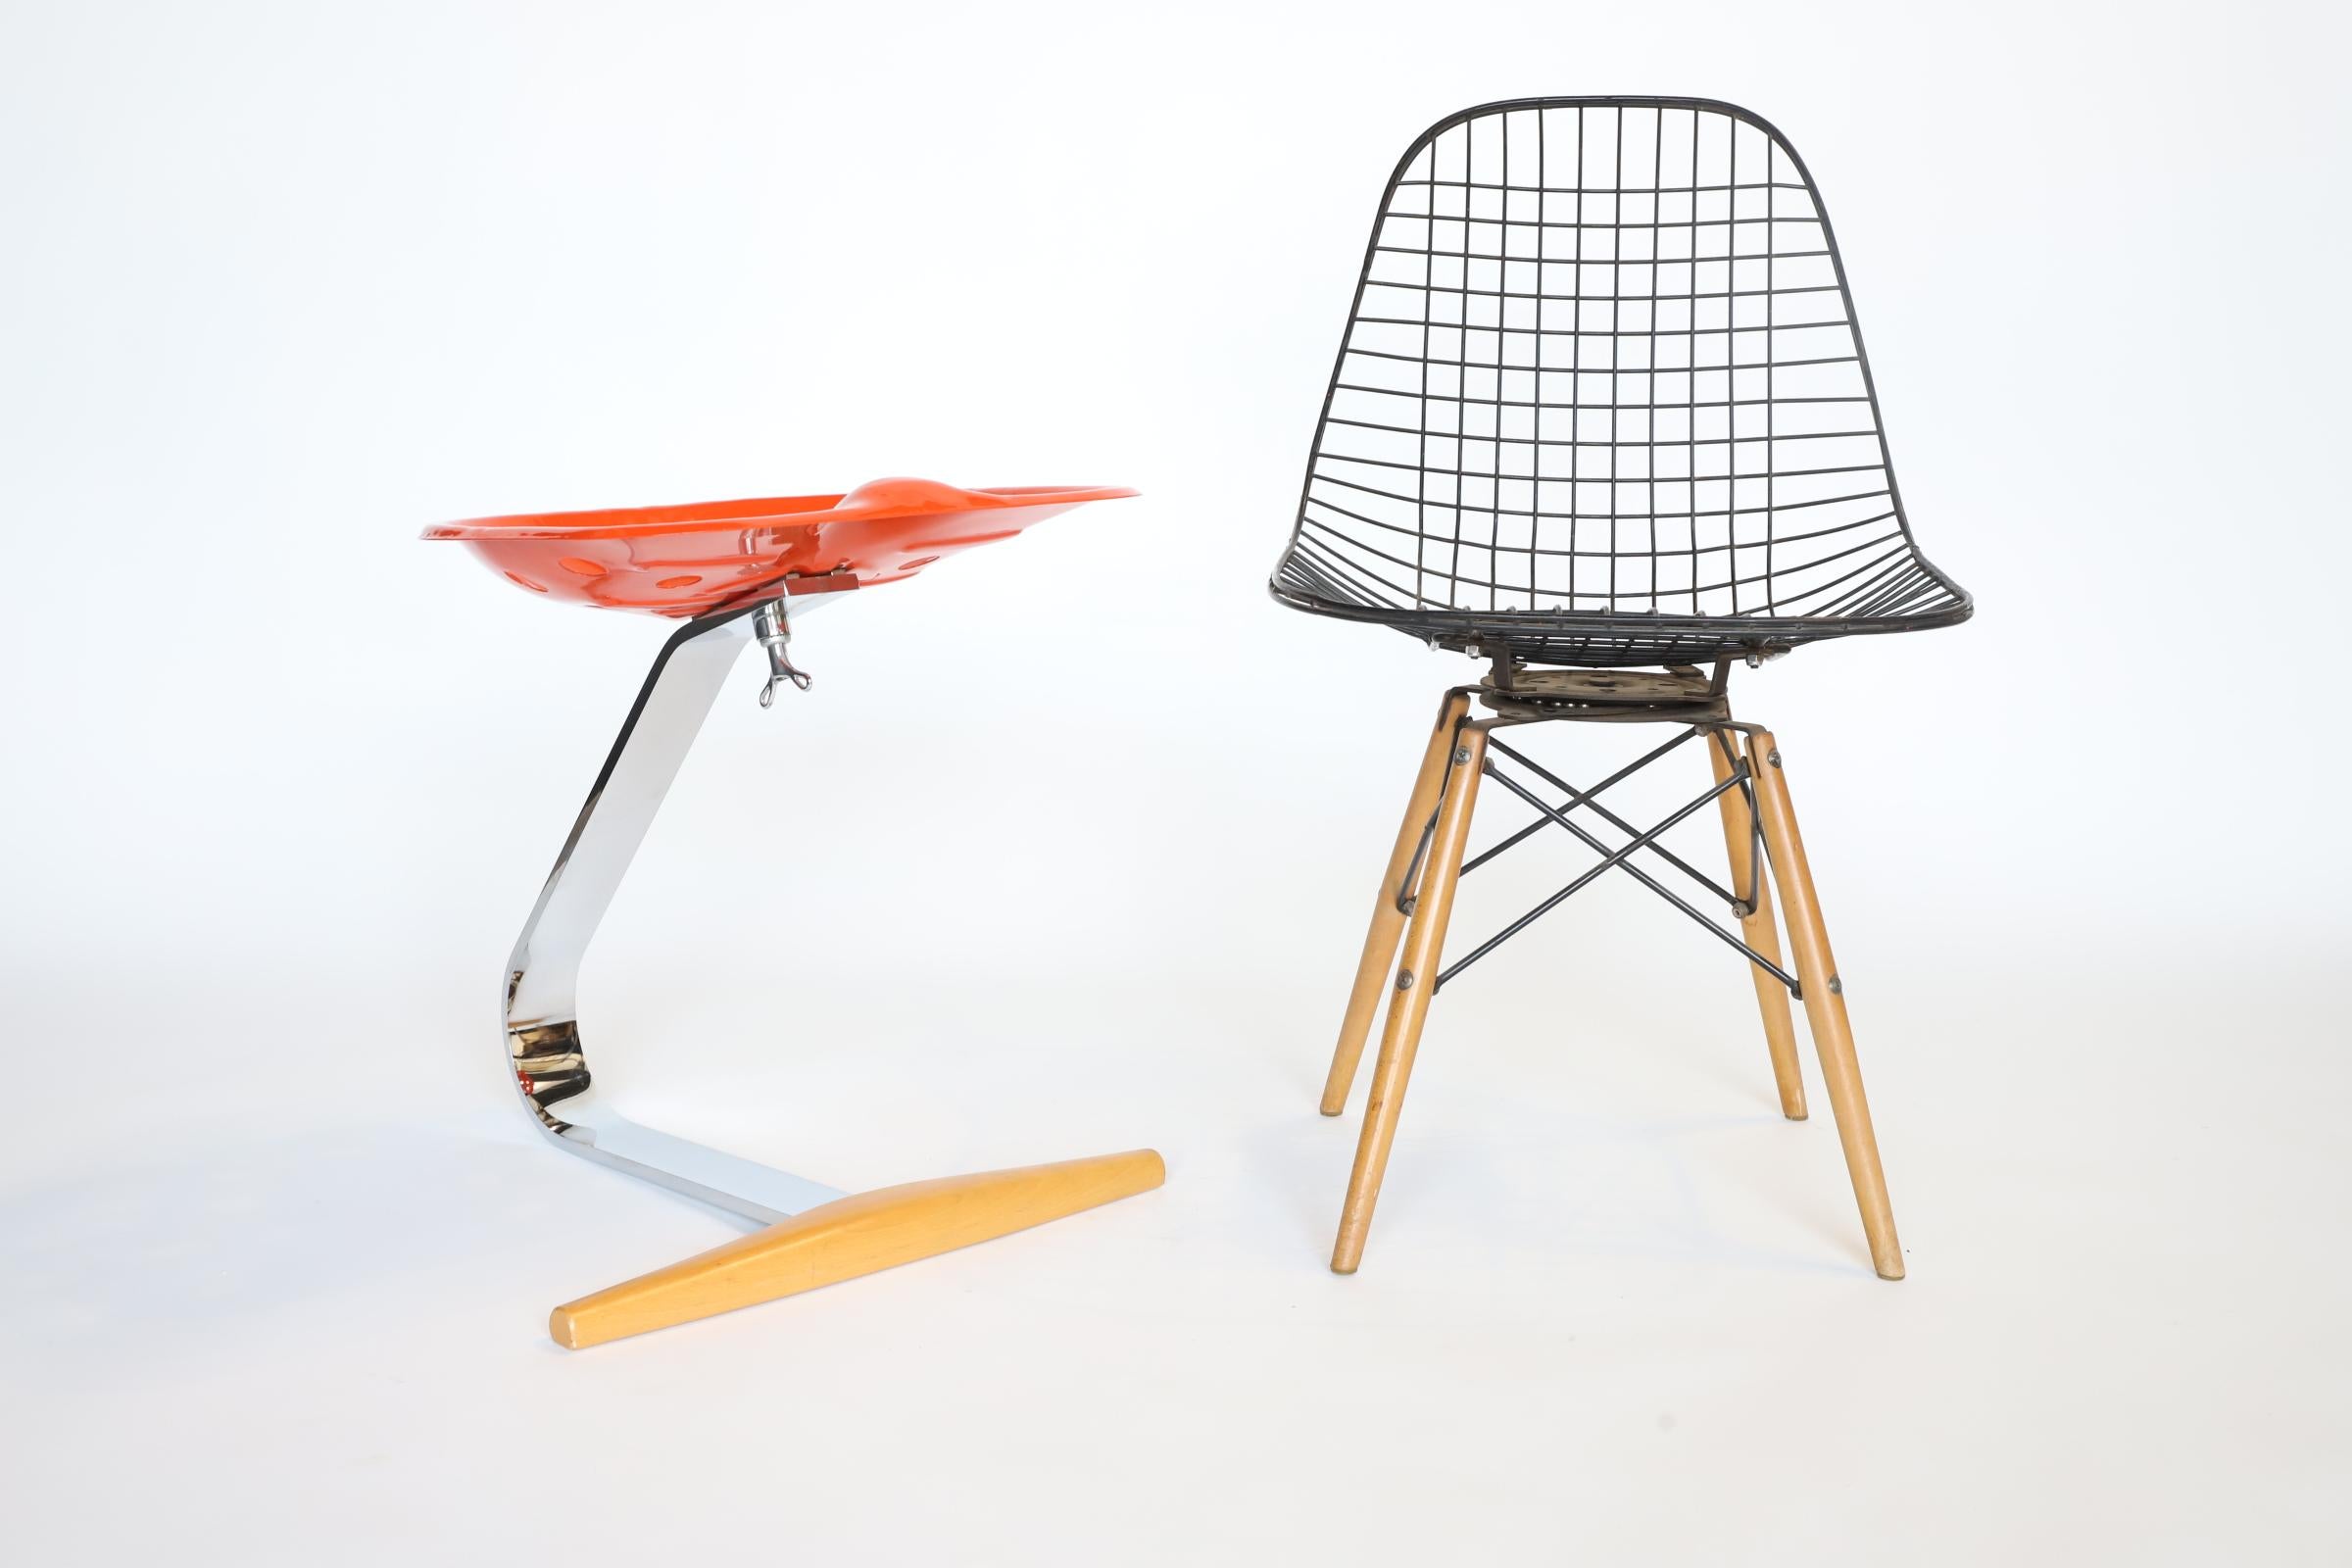 Zanotta Mezzadro Stool in Orange/Red with Steel and Wood Base 5